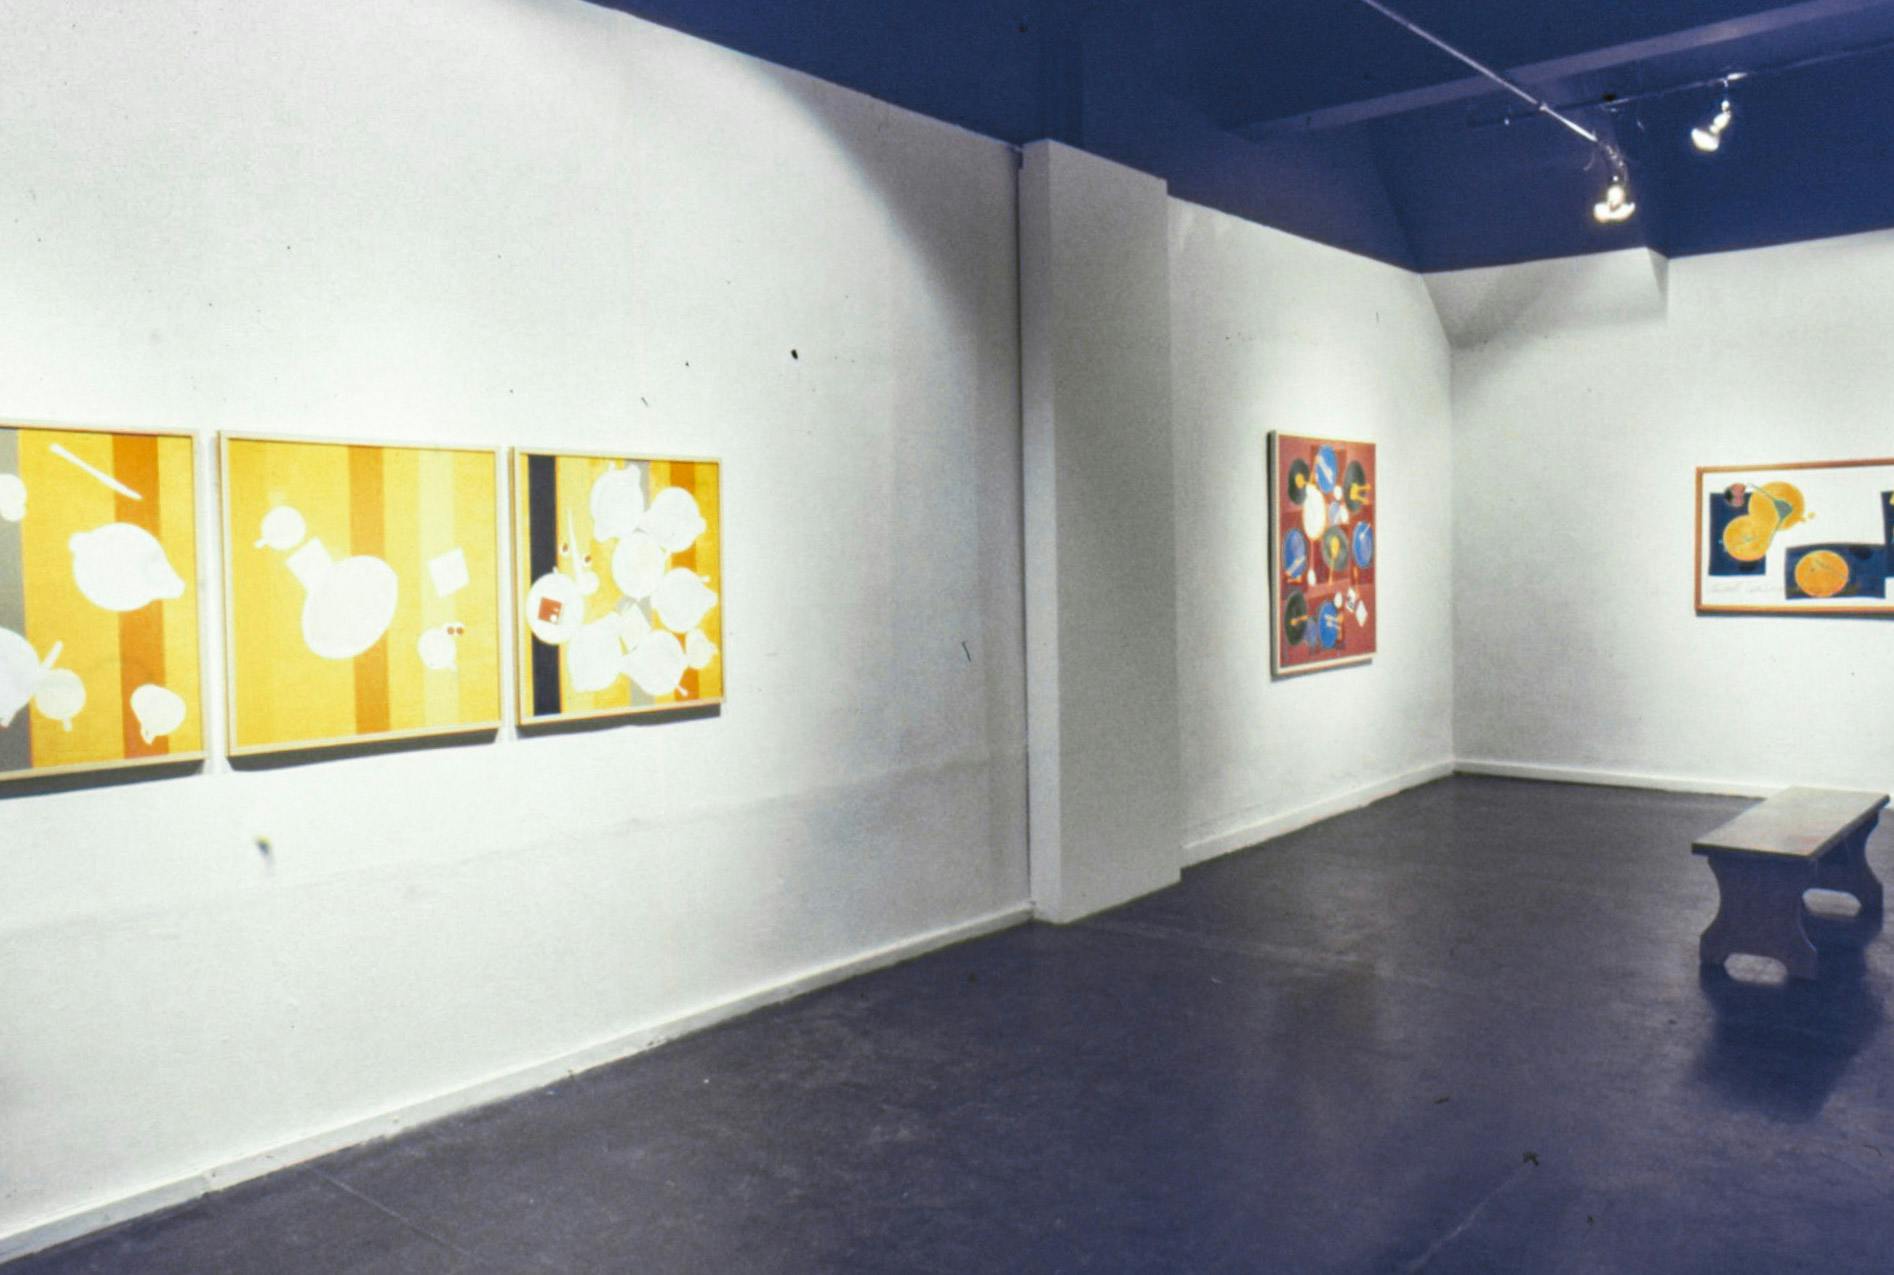 A gallery space with framed paintings on the walls and a bench on the floor. The paintings are colourful and show different dinnerware sets which have colourful patterns on the backgrounds.